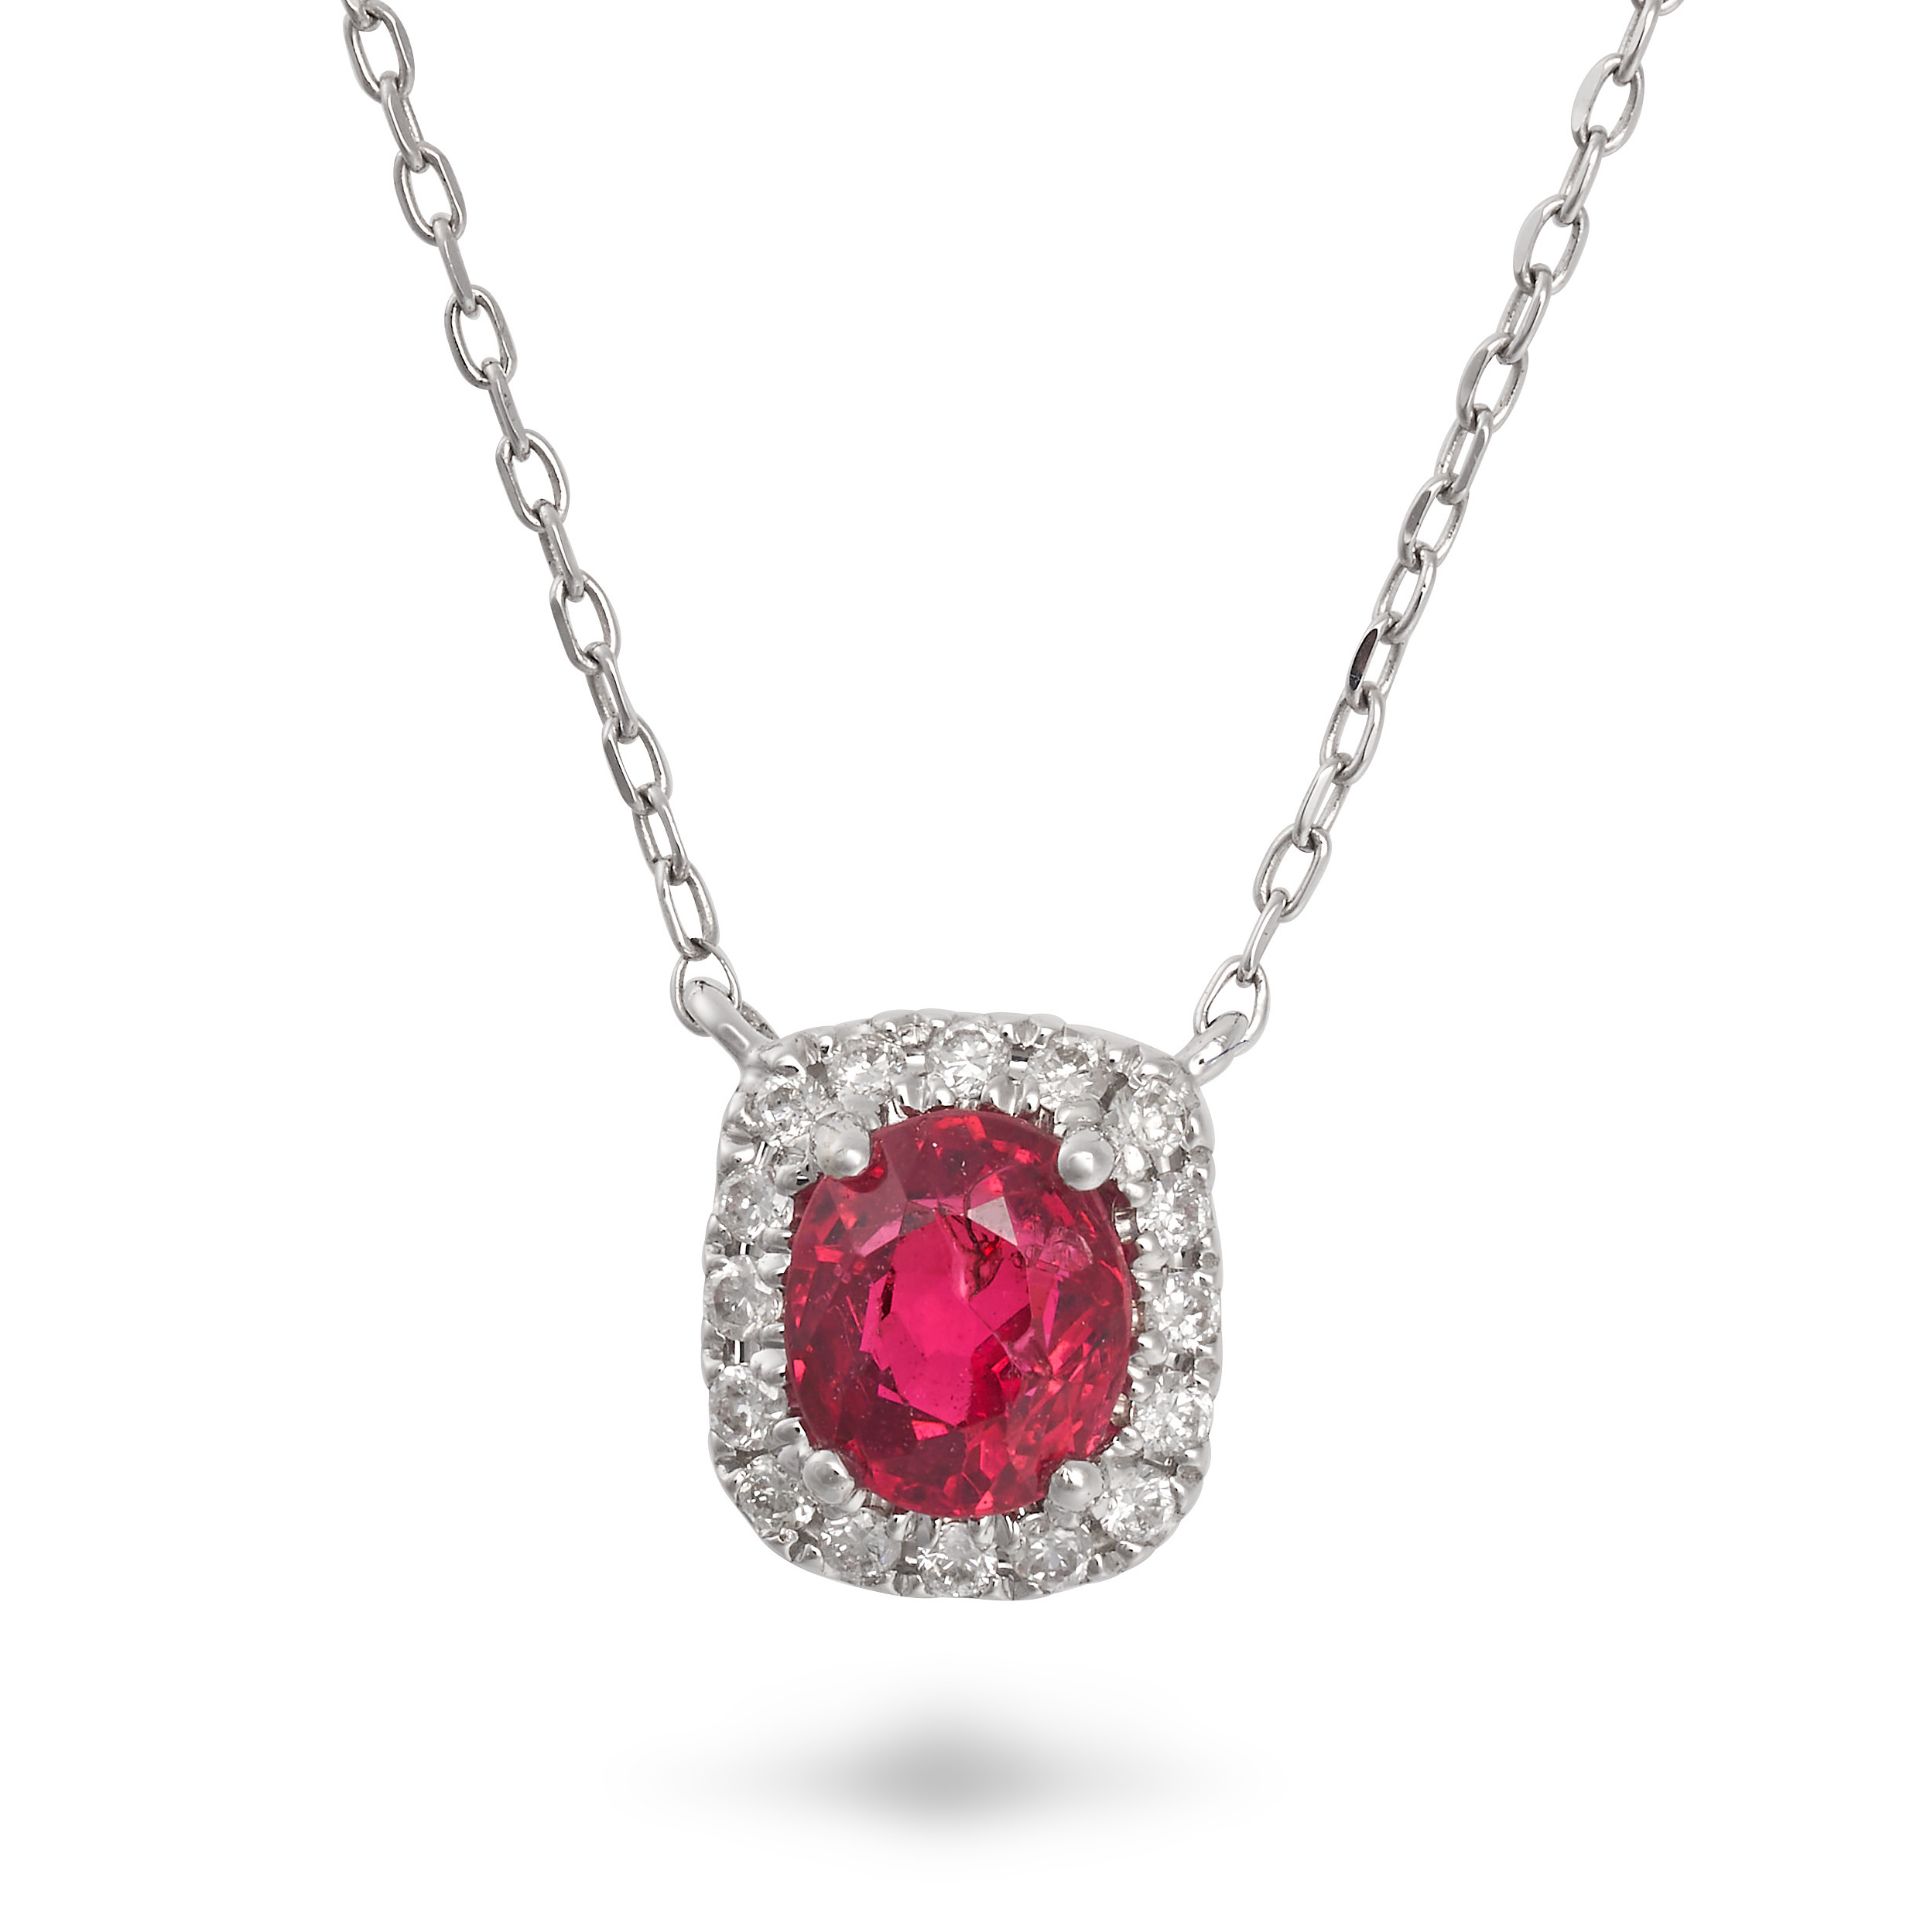 A SPINEL AND DIAMOND PENDANT NECKLACE set with an oval cut spinel in a border of round cut diamon...